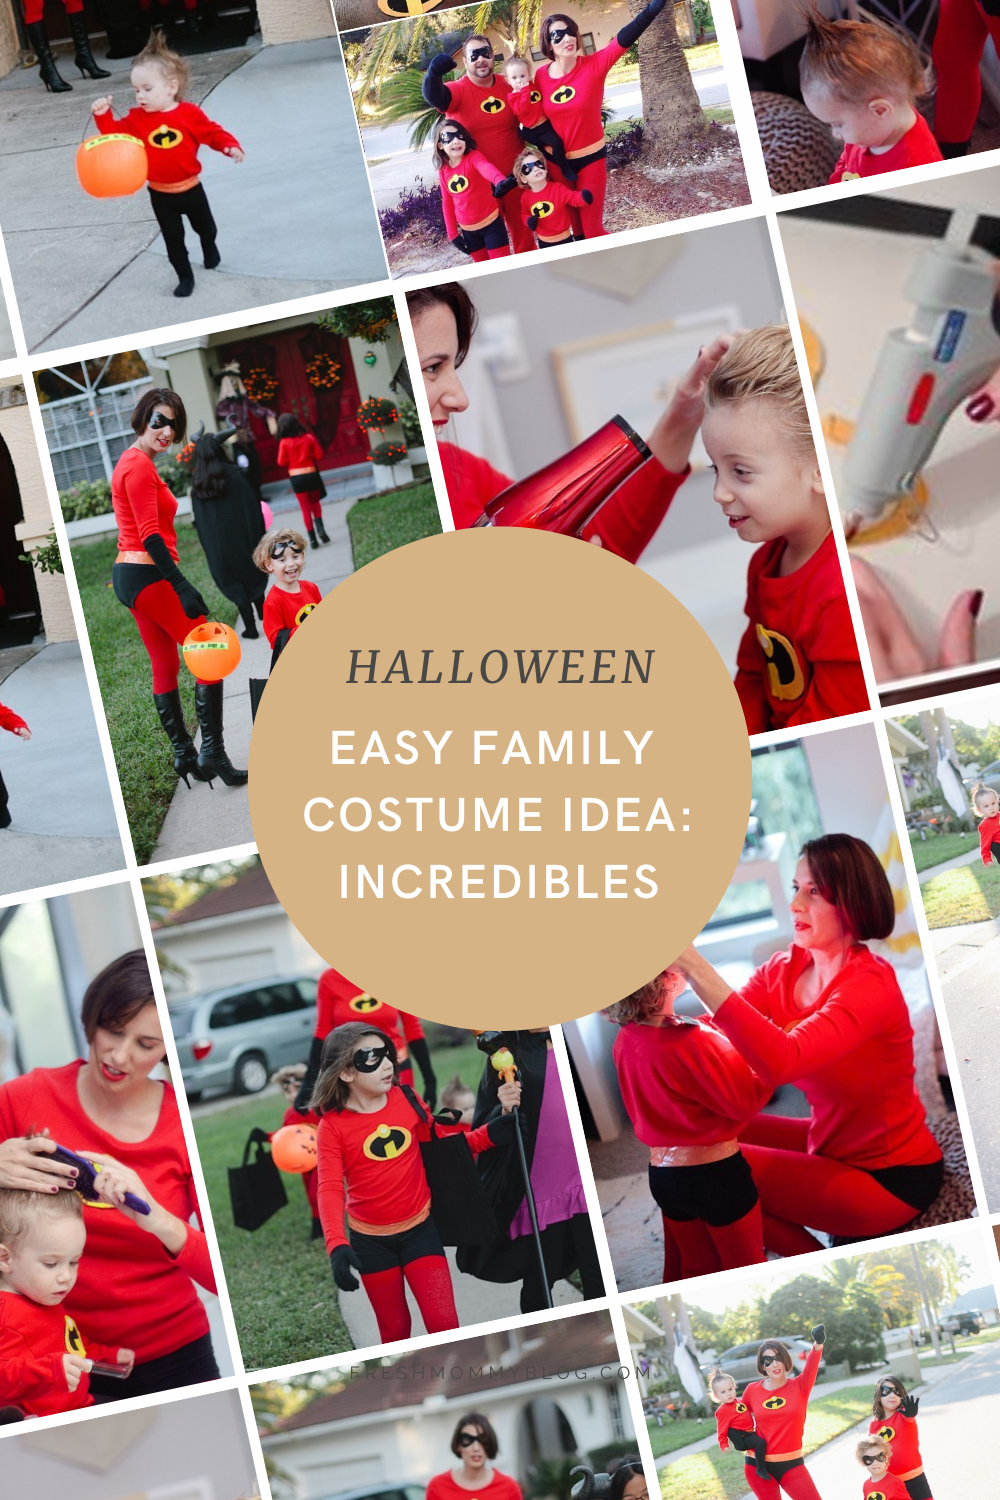 Family Halloween Costume Idea from the Incredibles movie. Easy DIY and affordable for a family on a budget.